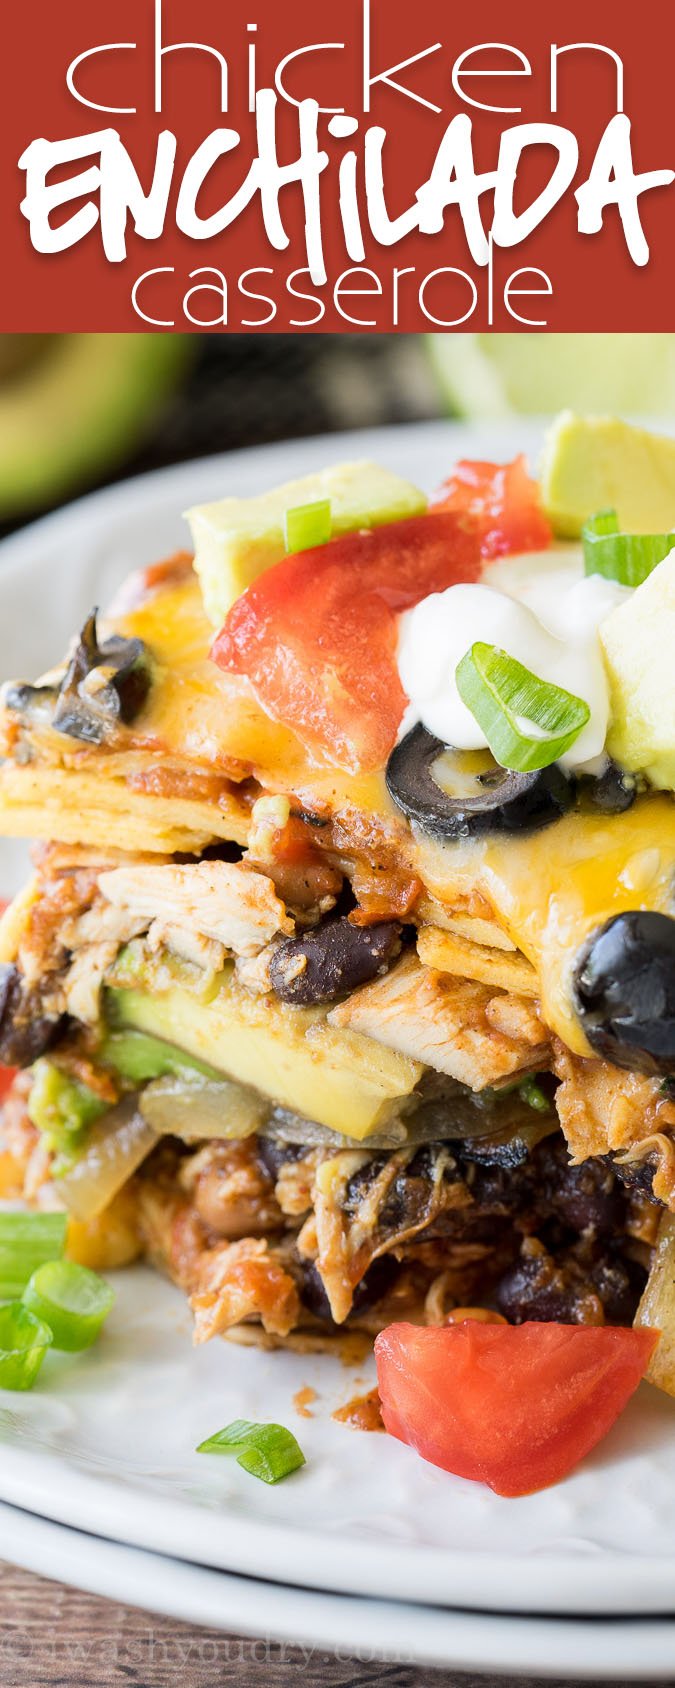 EASY Chicken Enchilada Casserole Recipe! My whole family loved this dinner! 